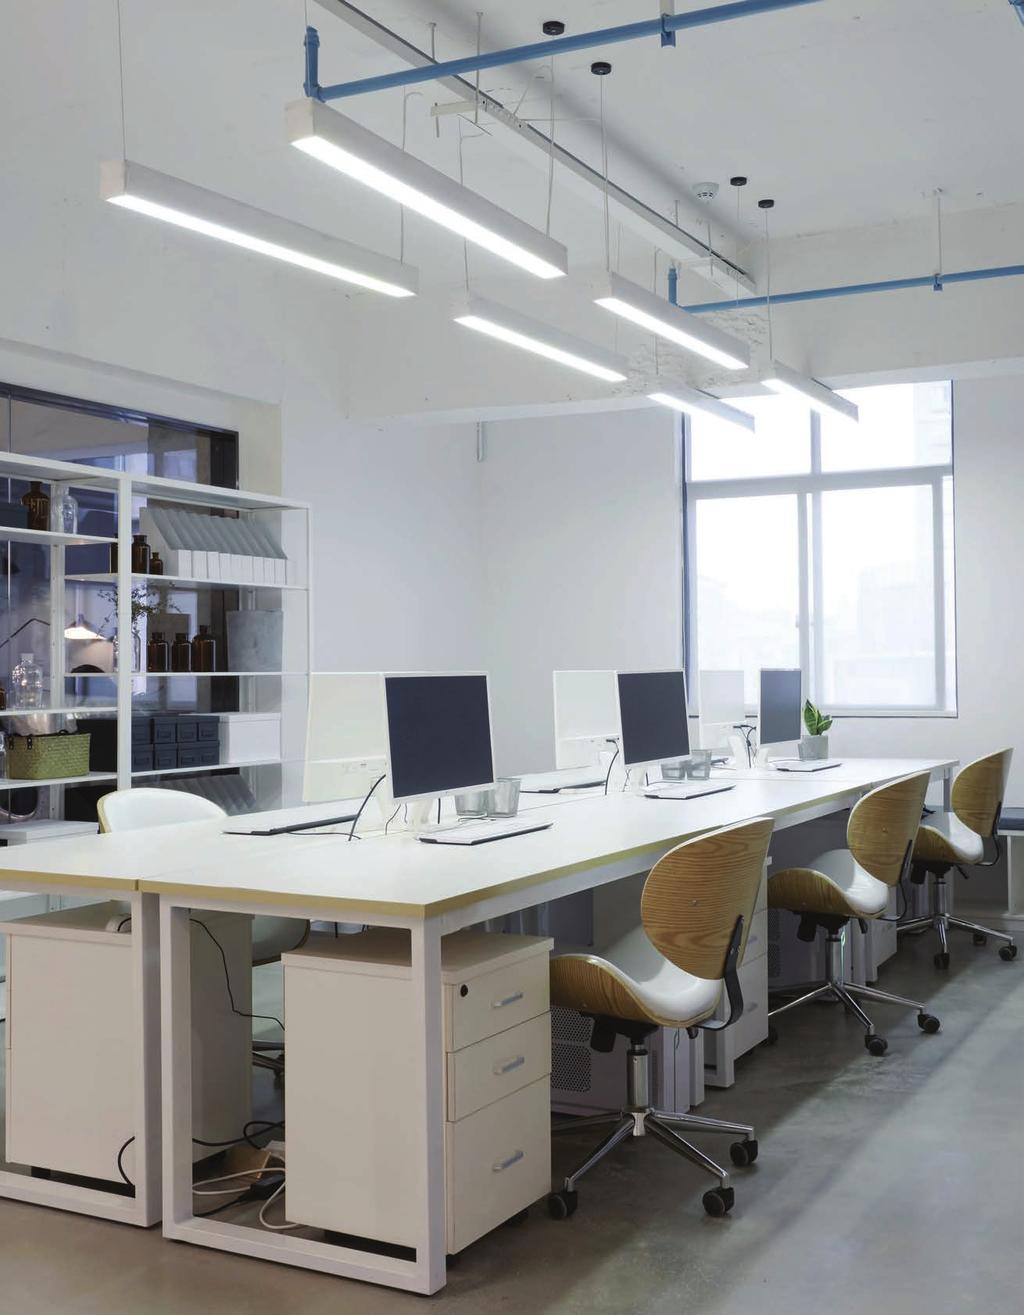 Managing energy performance is an increasing challenge in the face of new market forces Transformative Lighting Technology Mainstream adoption of solid state lighting has added a new level of